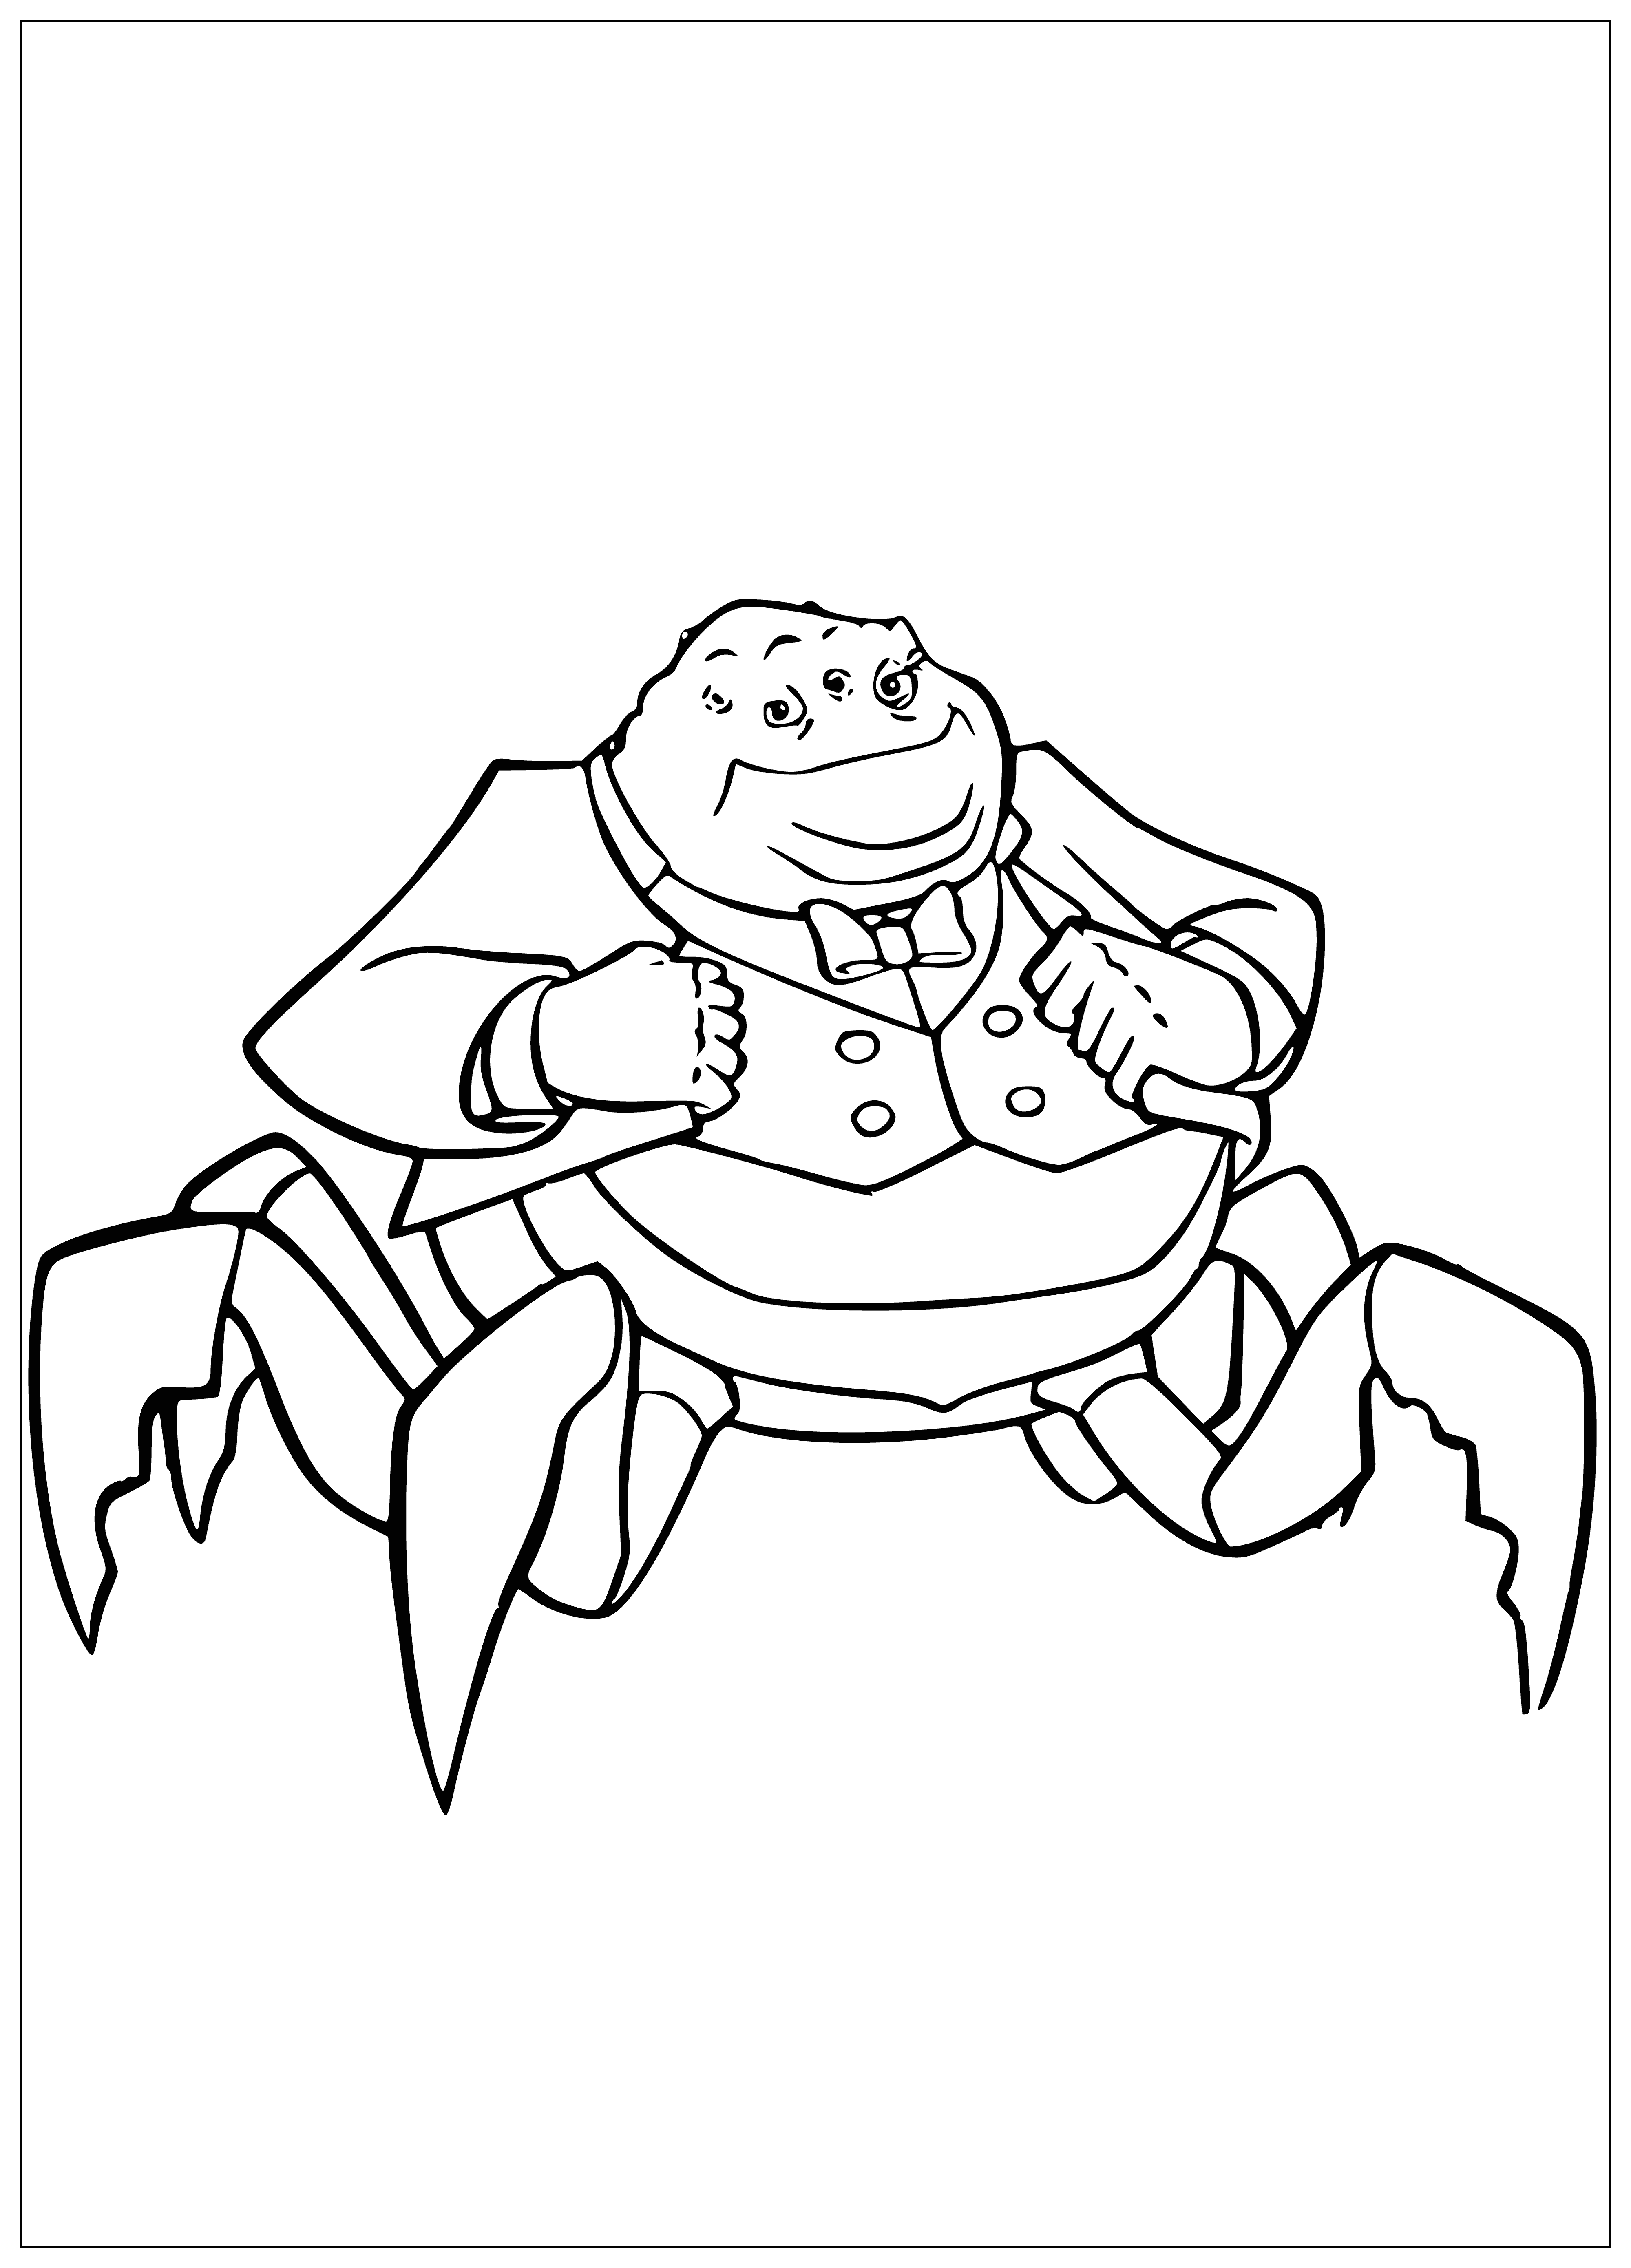 coloring page: Sulley is the Director of Monster Inc., a blue and white furred creature with orange eyes, claws, and a sharp-toothed wide mouth. He's wearing a black suit, white shirt, and a nameplate that reads "Director."